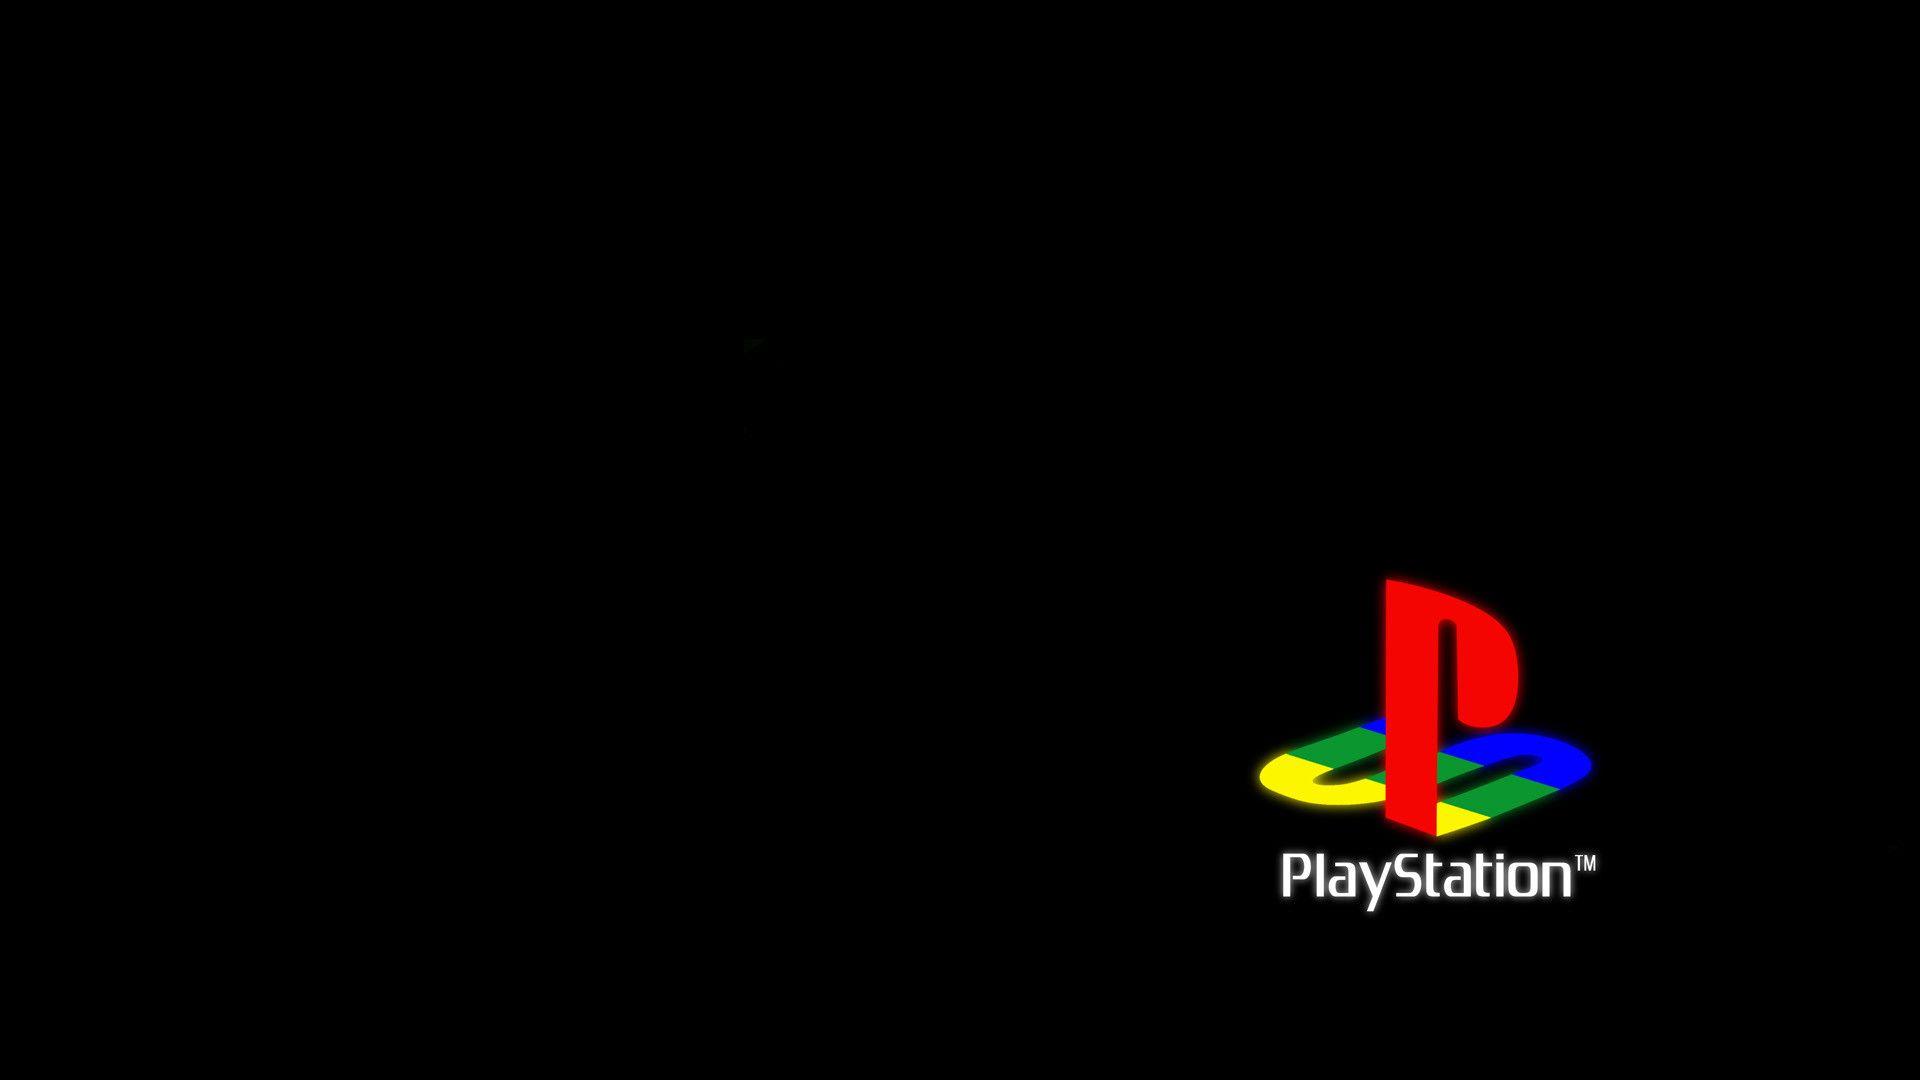 Discover 82+ playstation logo wallpaper - in.cdgdbentre